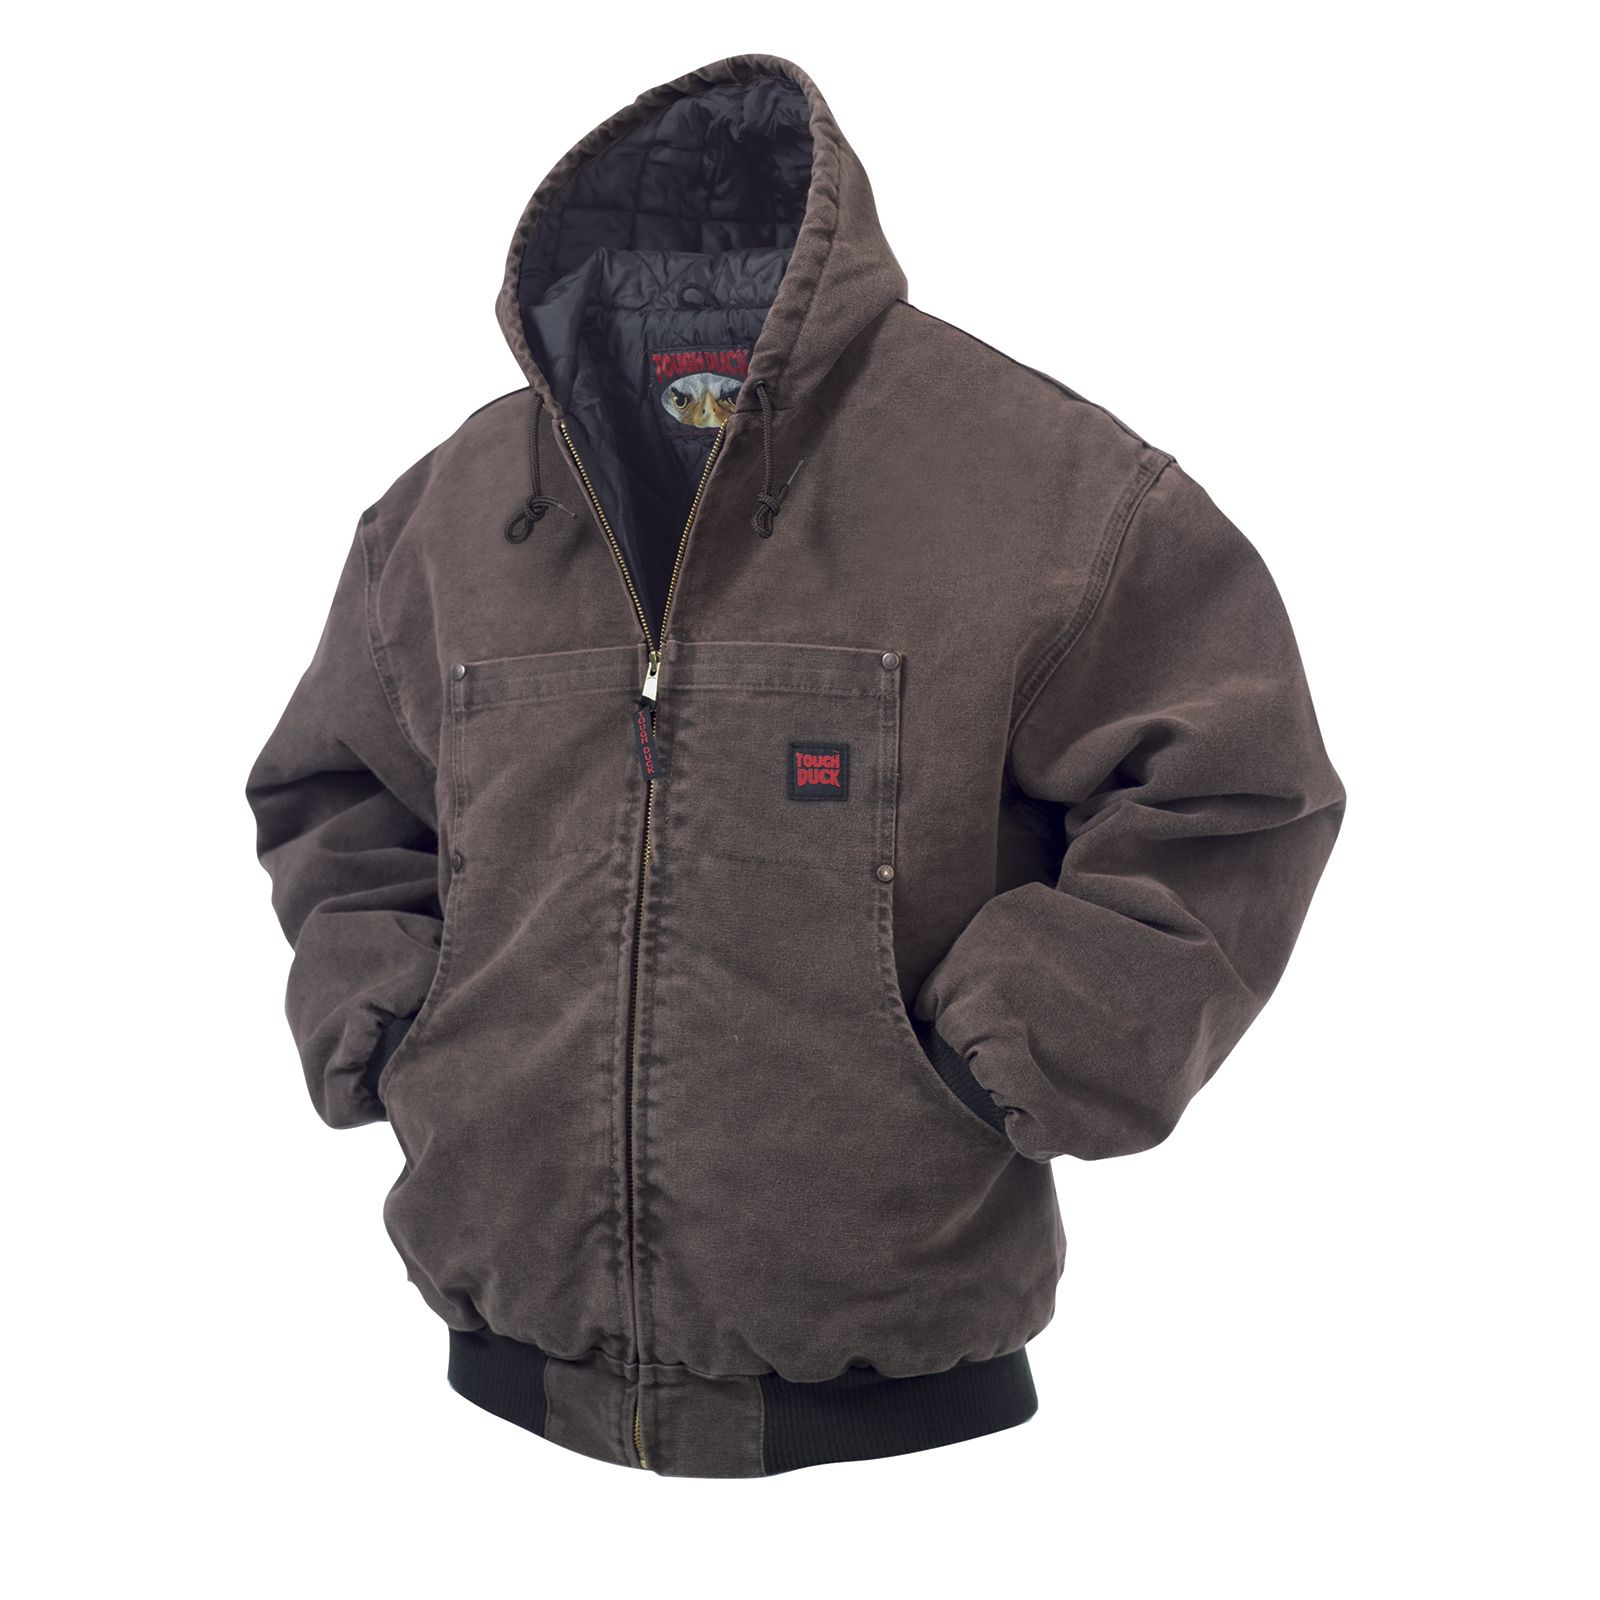 Tough Duck Men's Big & Tall Washed hooded duck bomber